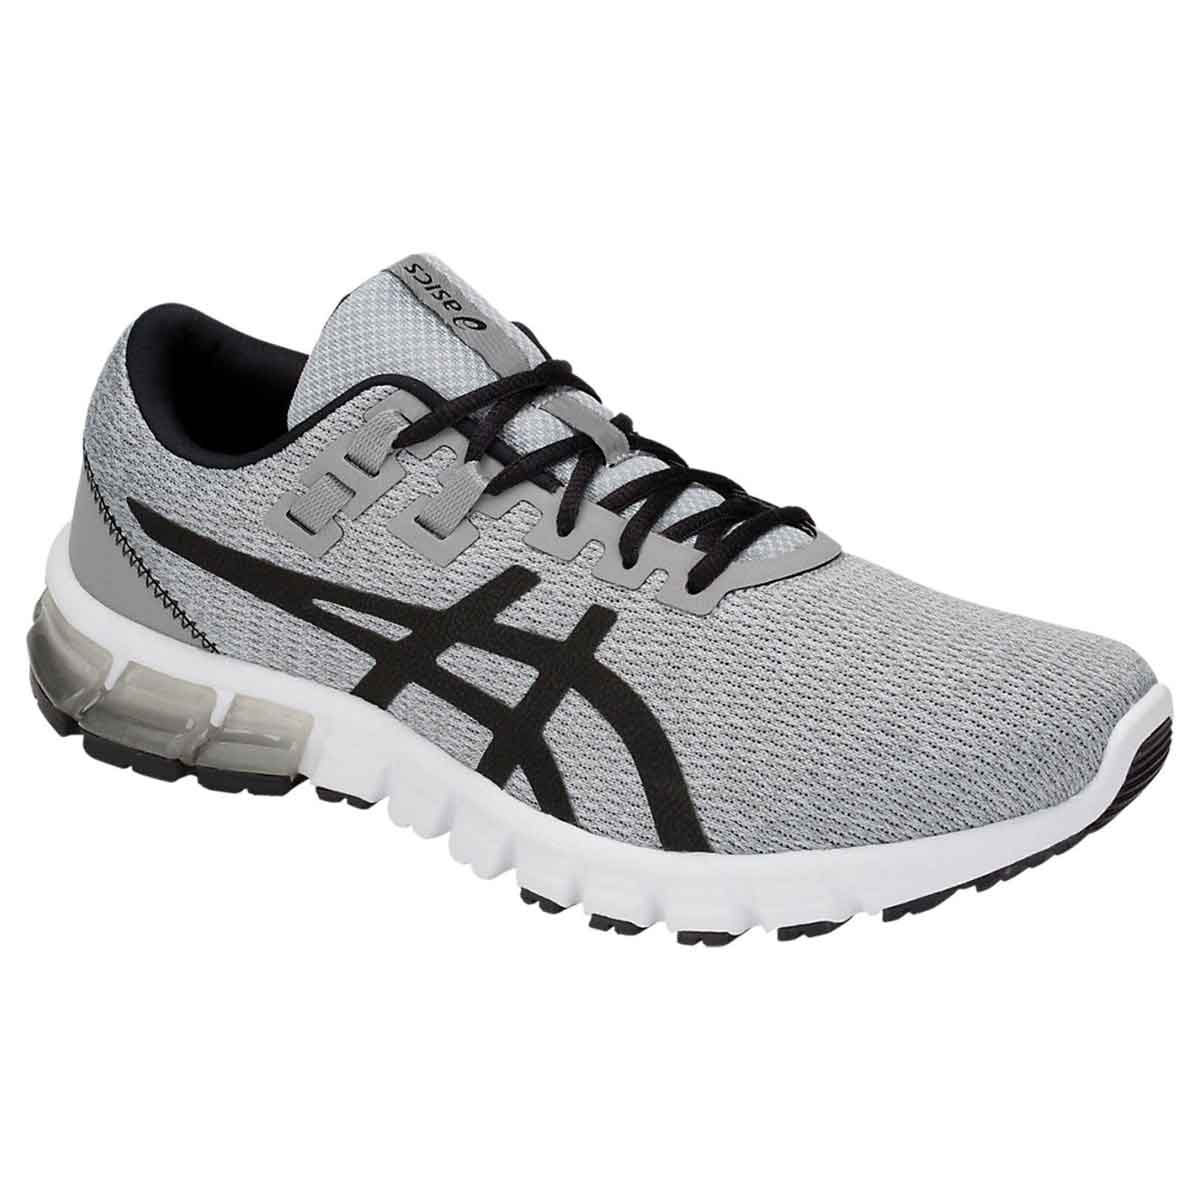 asics running shoes india online